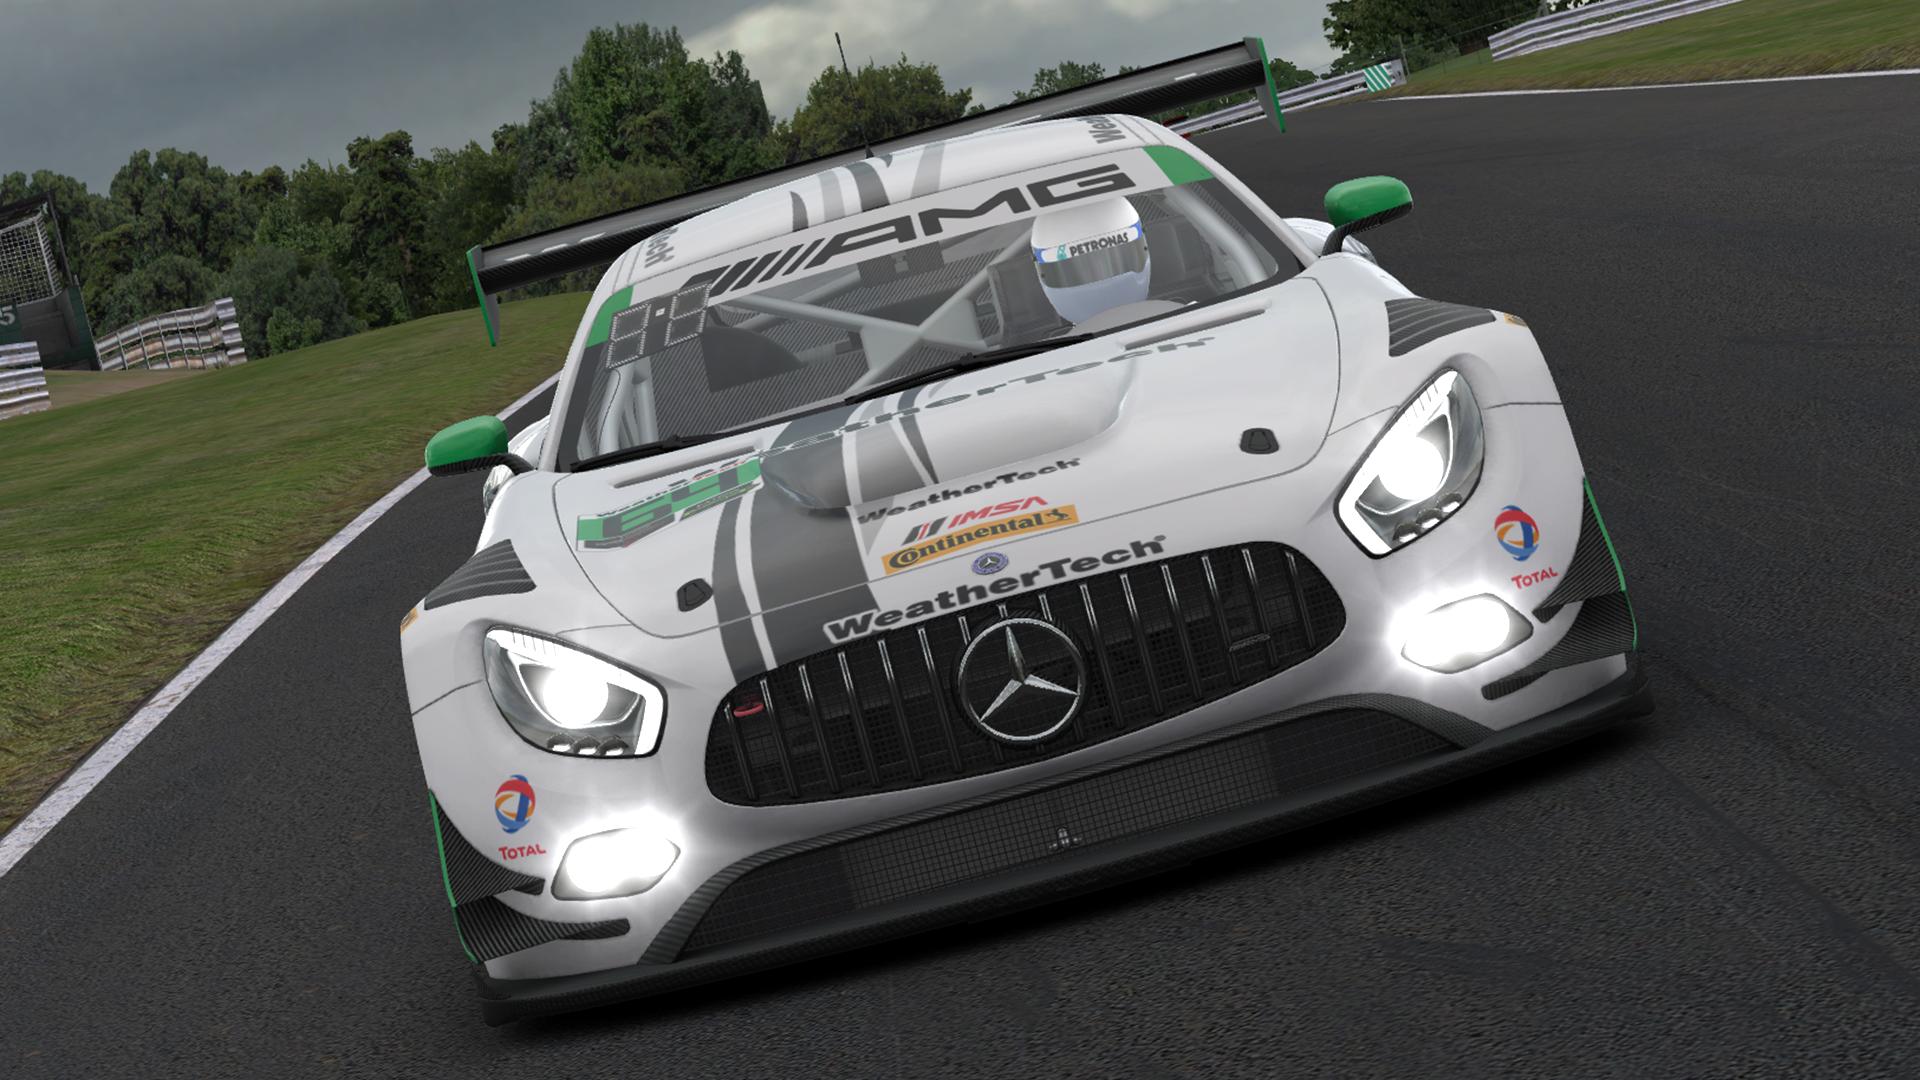 Preview of #50 Riley Motorsports Mercedes AMG GT3 (IMSA 2017) by Justin S Davis